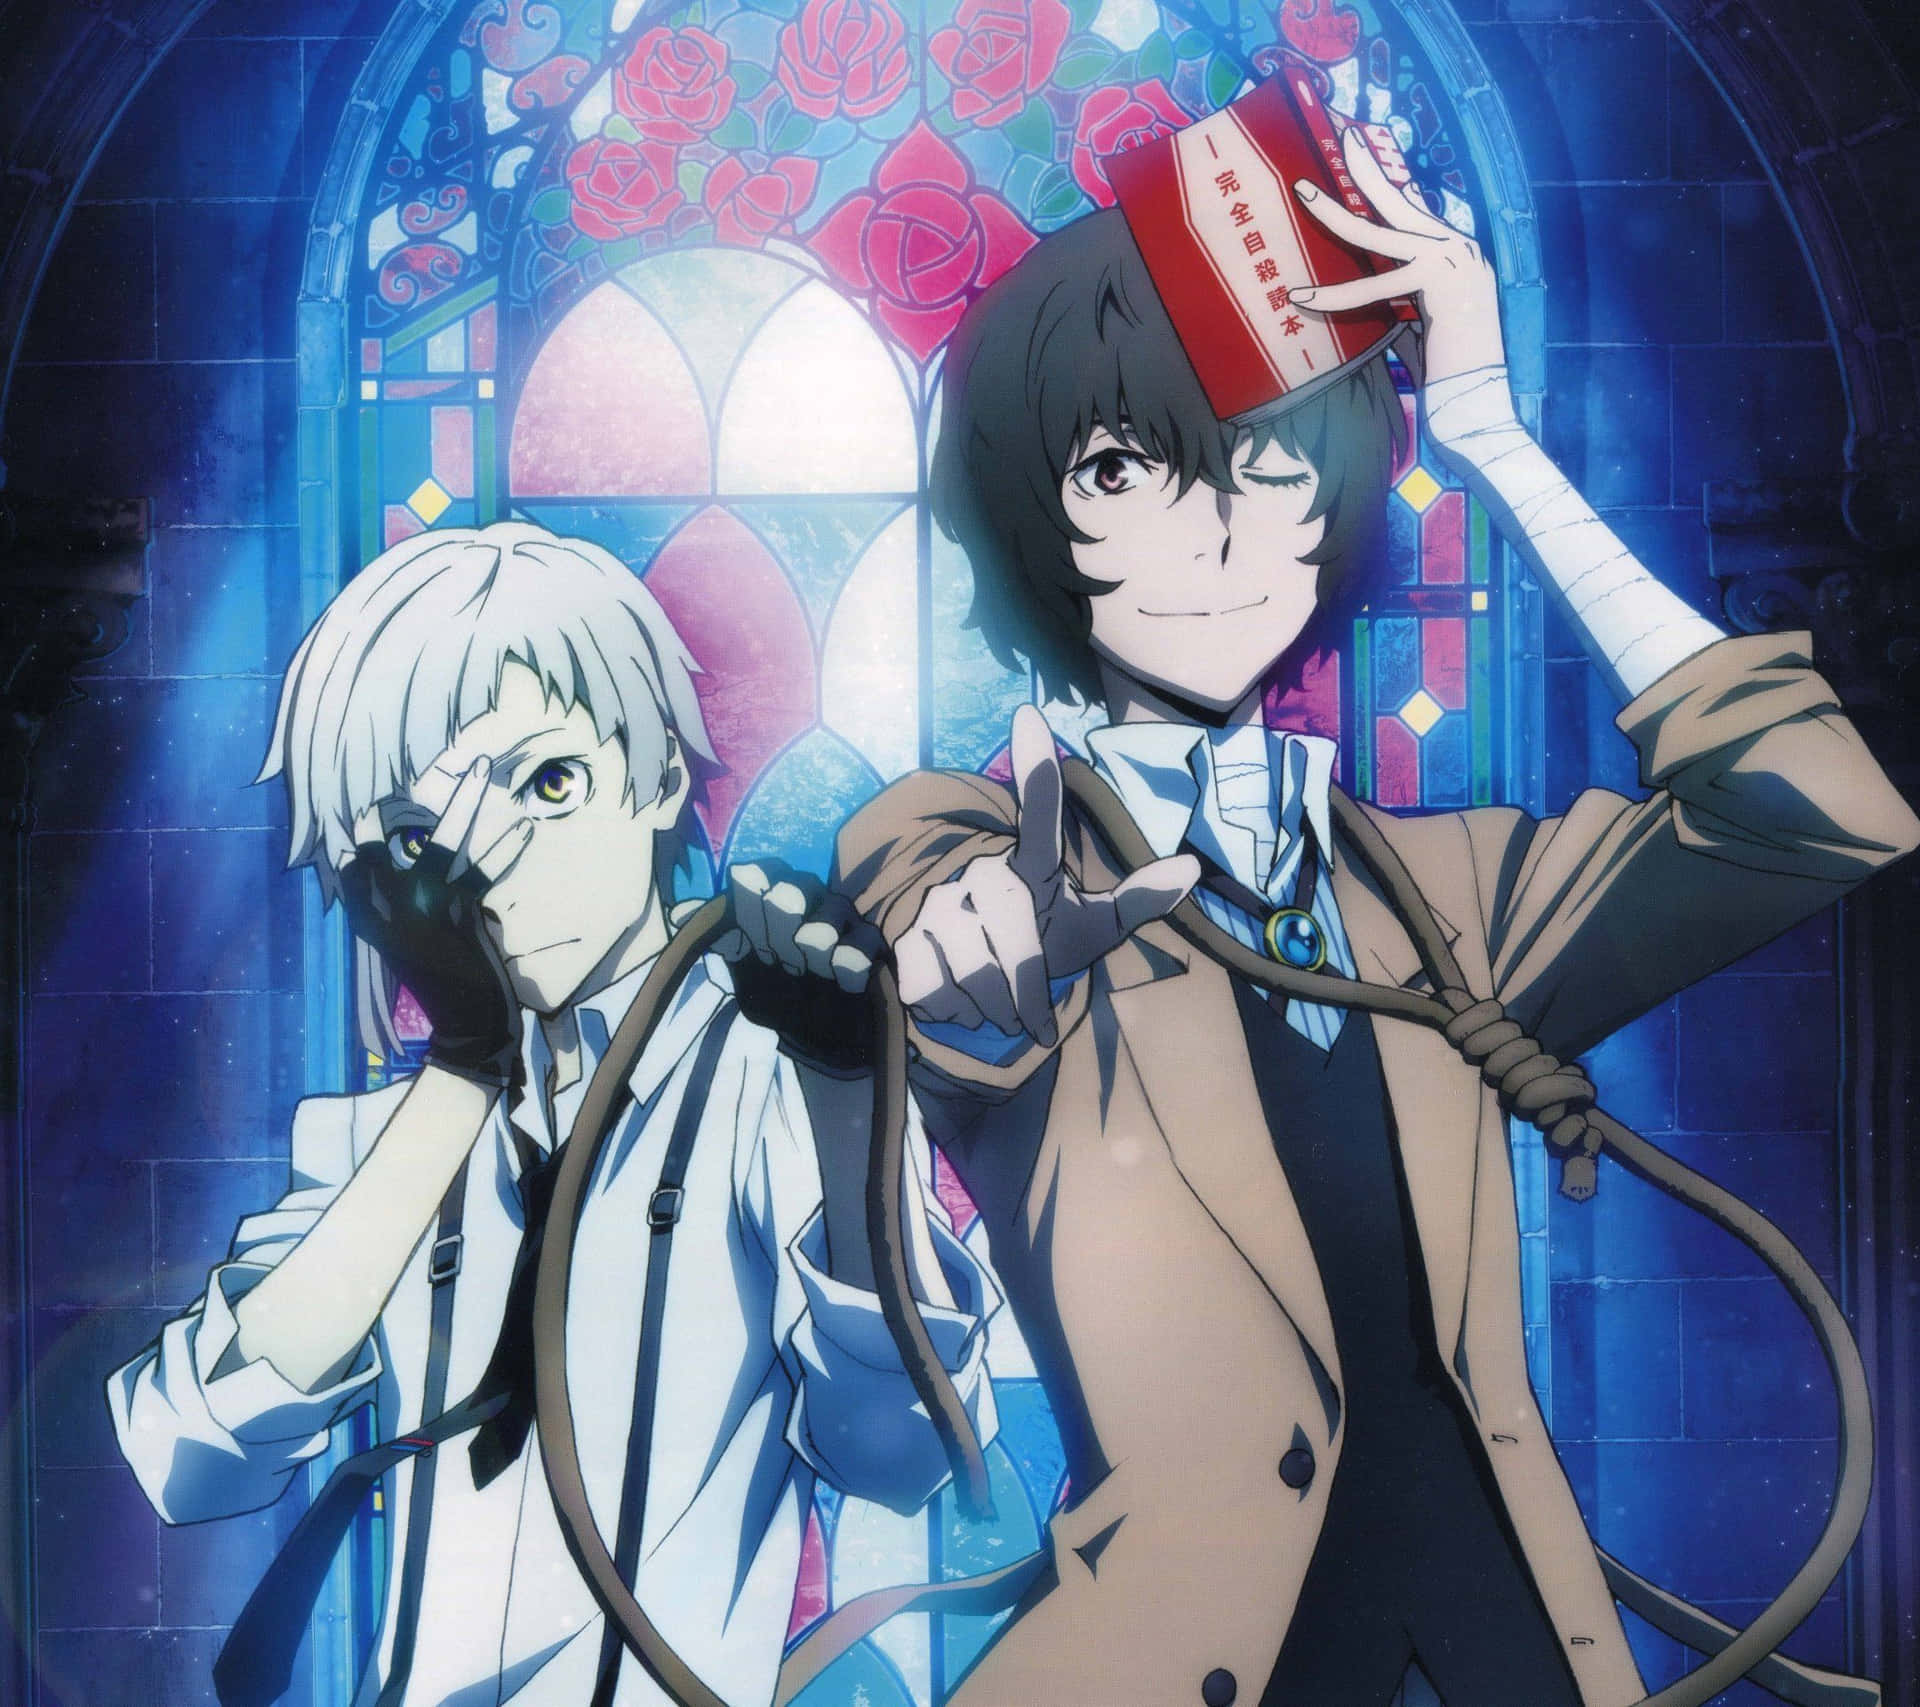 Join the supernatural battle in Bungo Stray Dogs